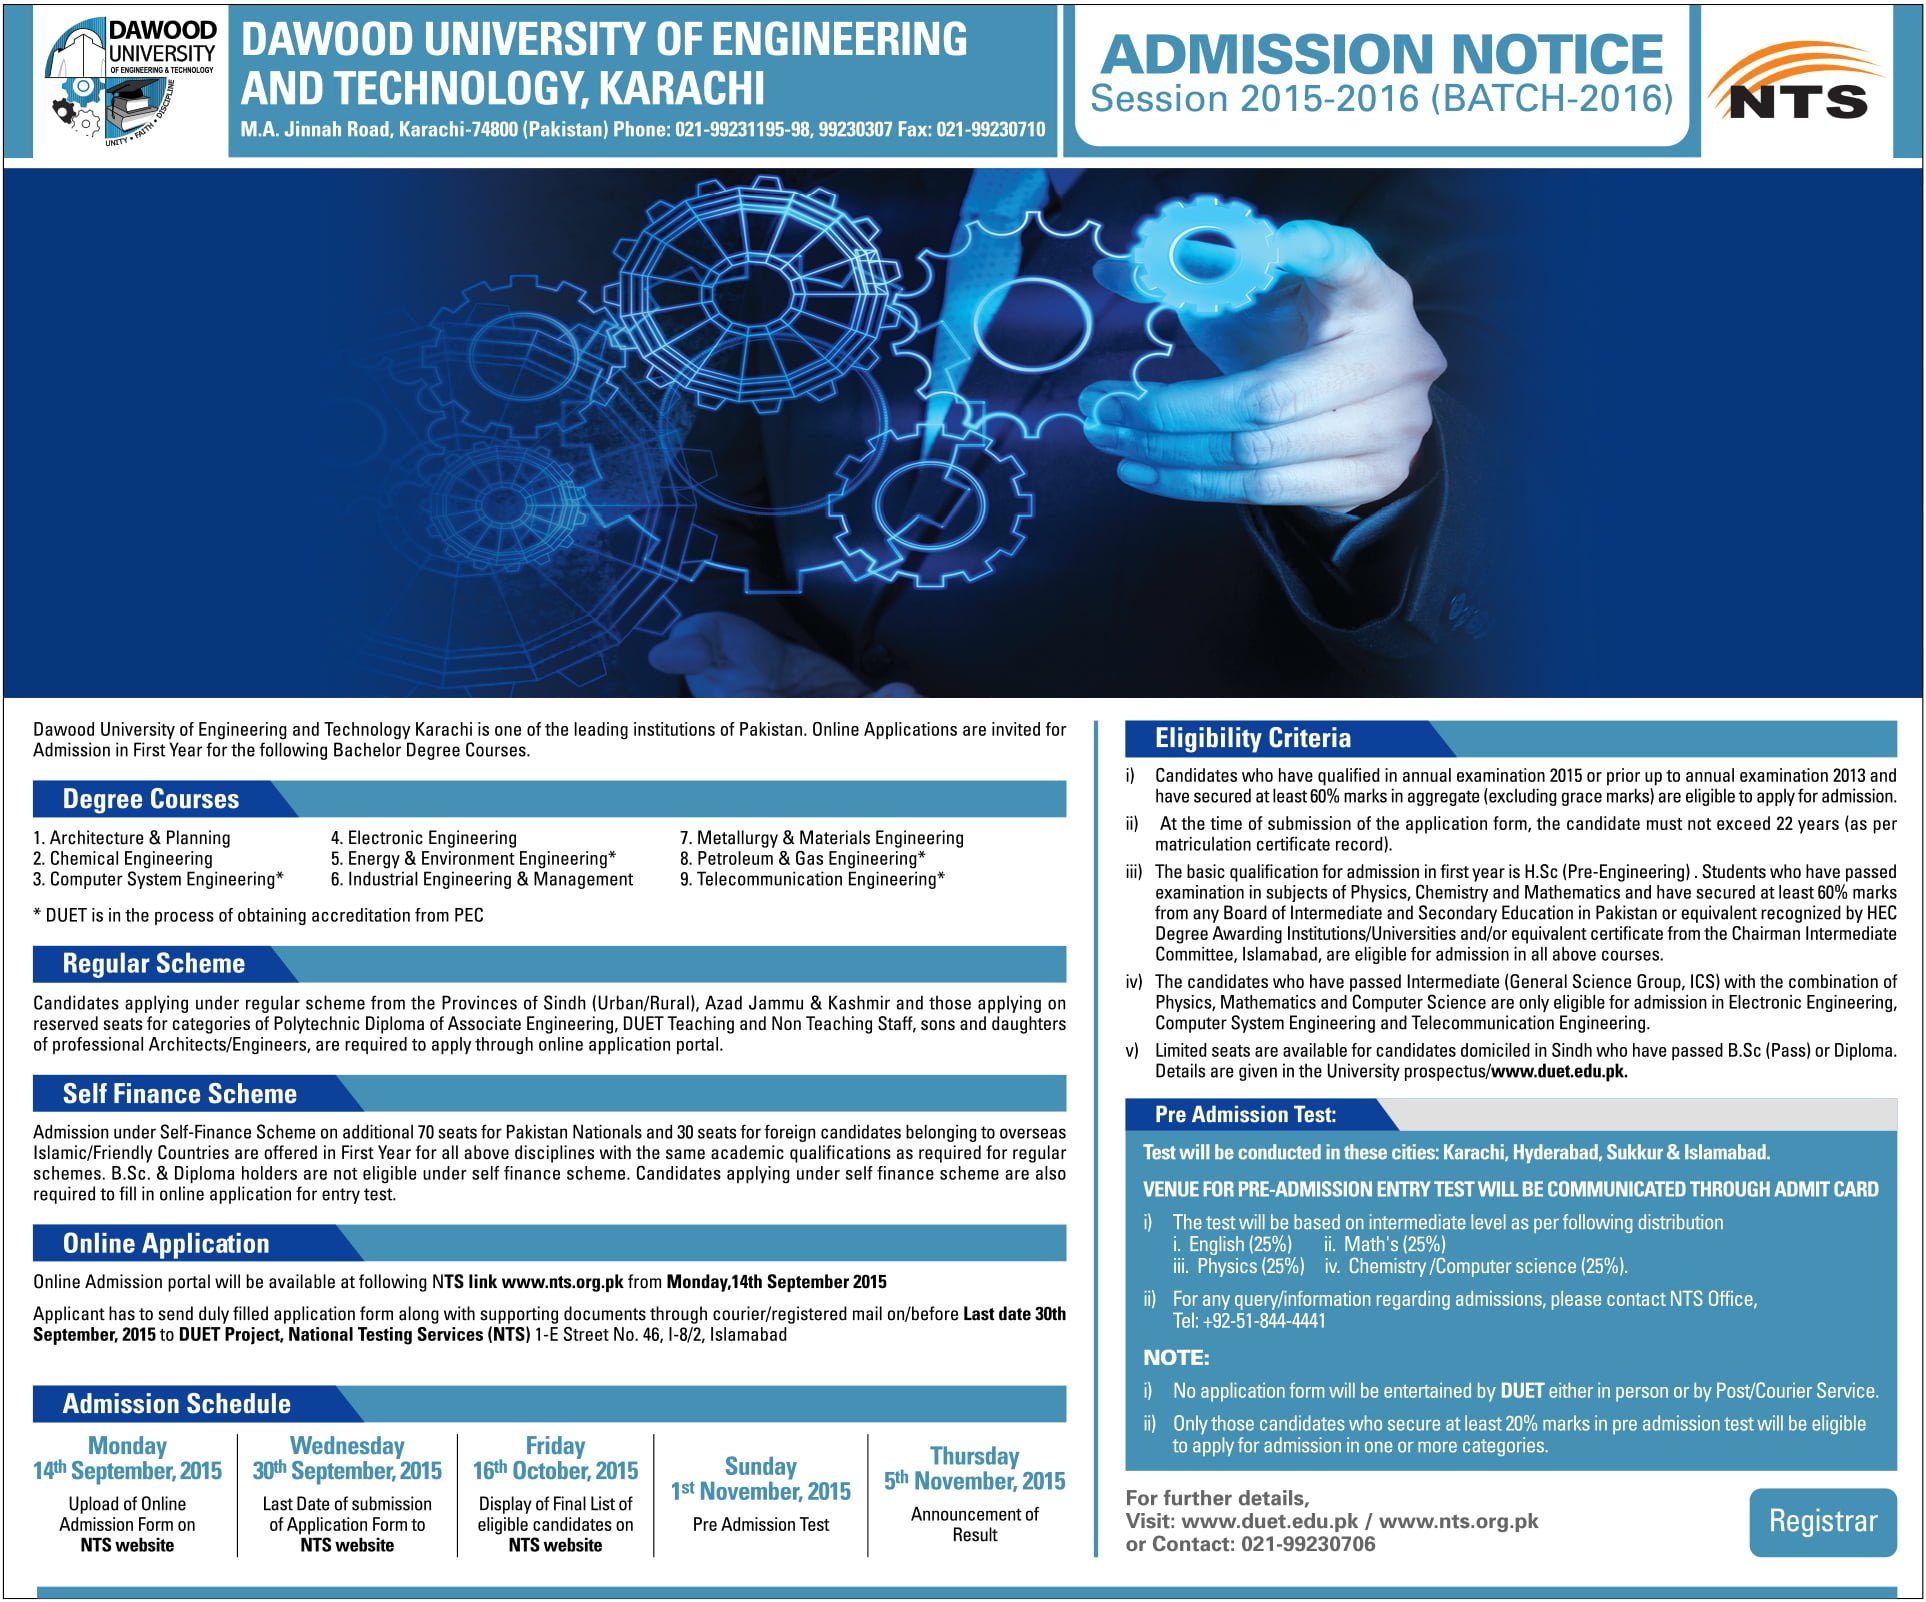 dawood-university-of-engineering-and-technology-karachi-duet-pre-admission-test-by-nts